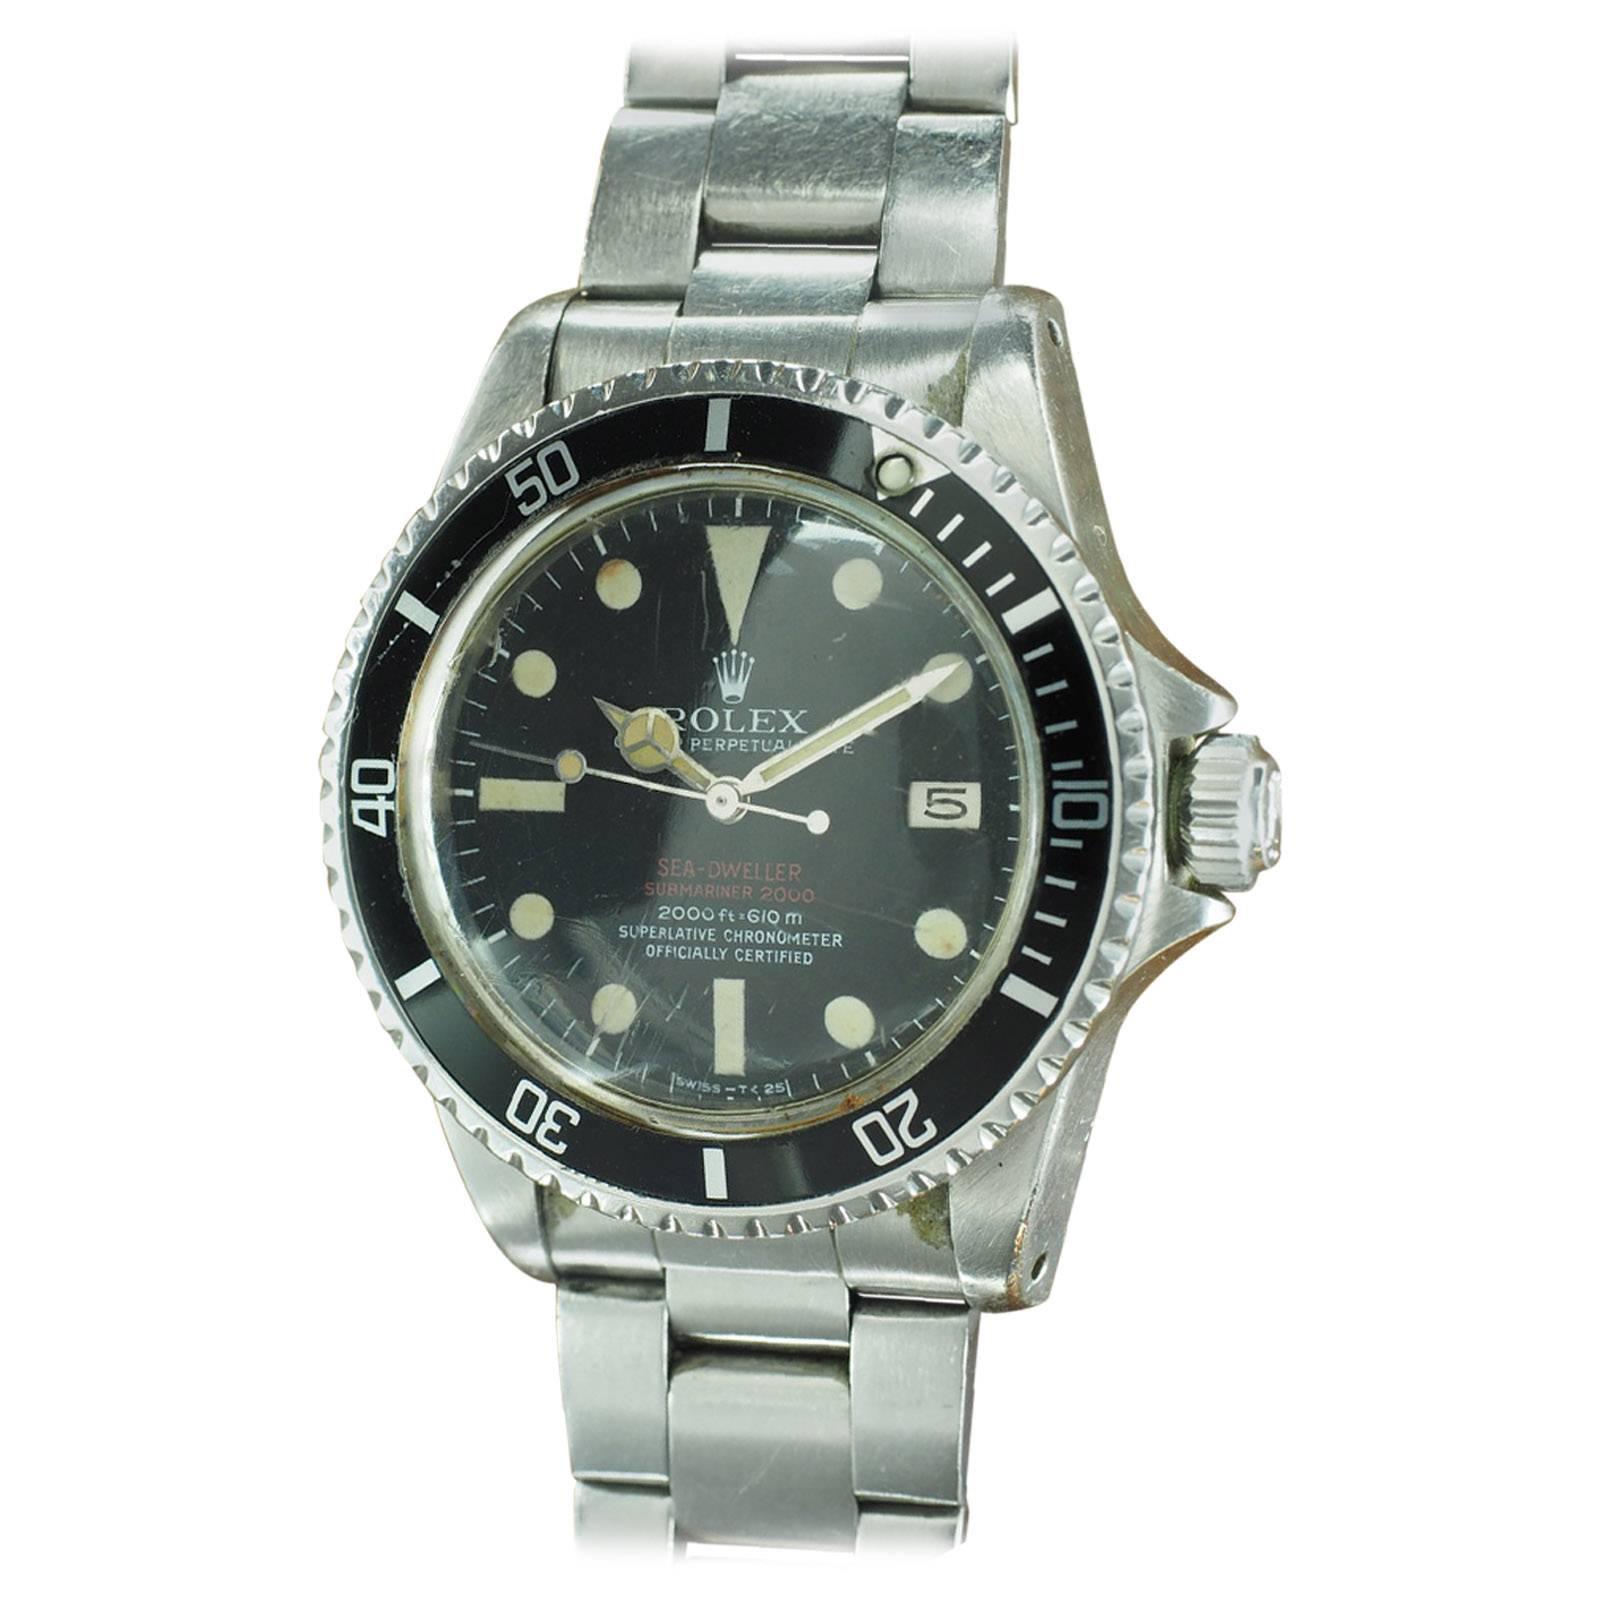 Rolex Stainless Steel Double Red Sea Dweller Wristwatch Ref 1665 For Sale